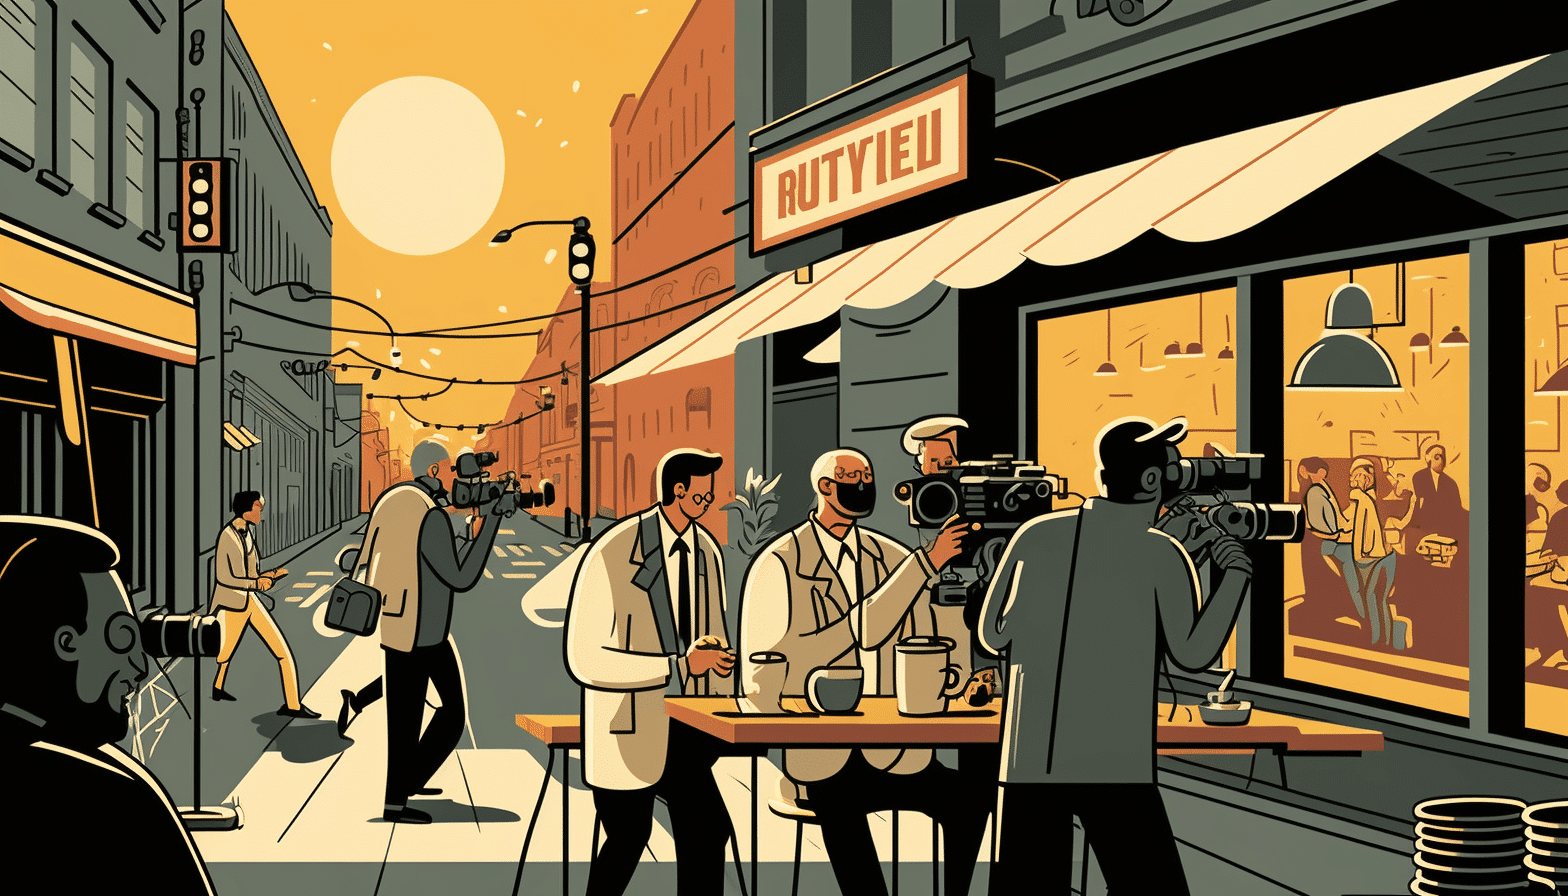 Video production team on a bustling city street shooting a commercial. The director wears sunglasses and sips a latte, while the cameraman captures the action with a handheld camera. The lighting technician uses natural light to create a bright, cheerful atmosphere. Retro-style illustration